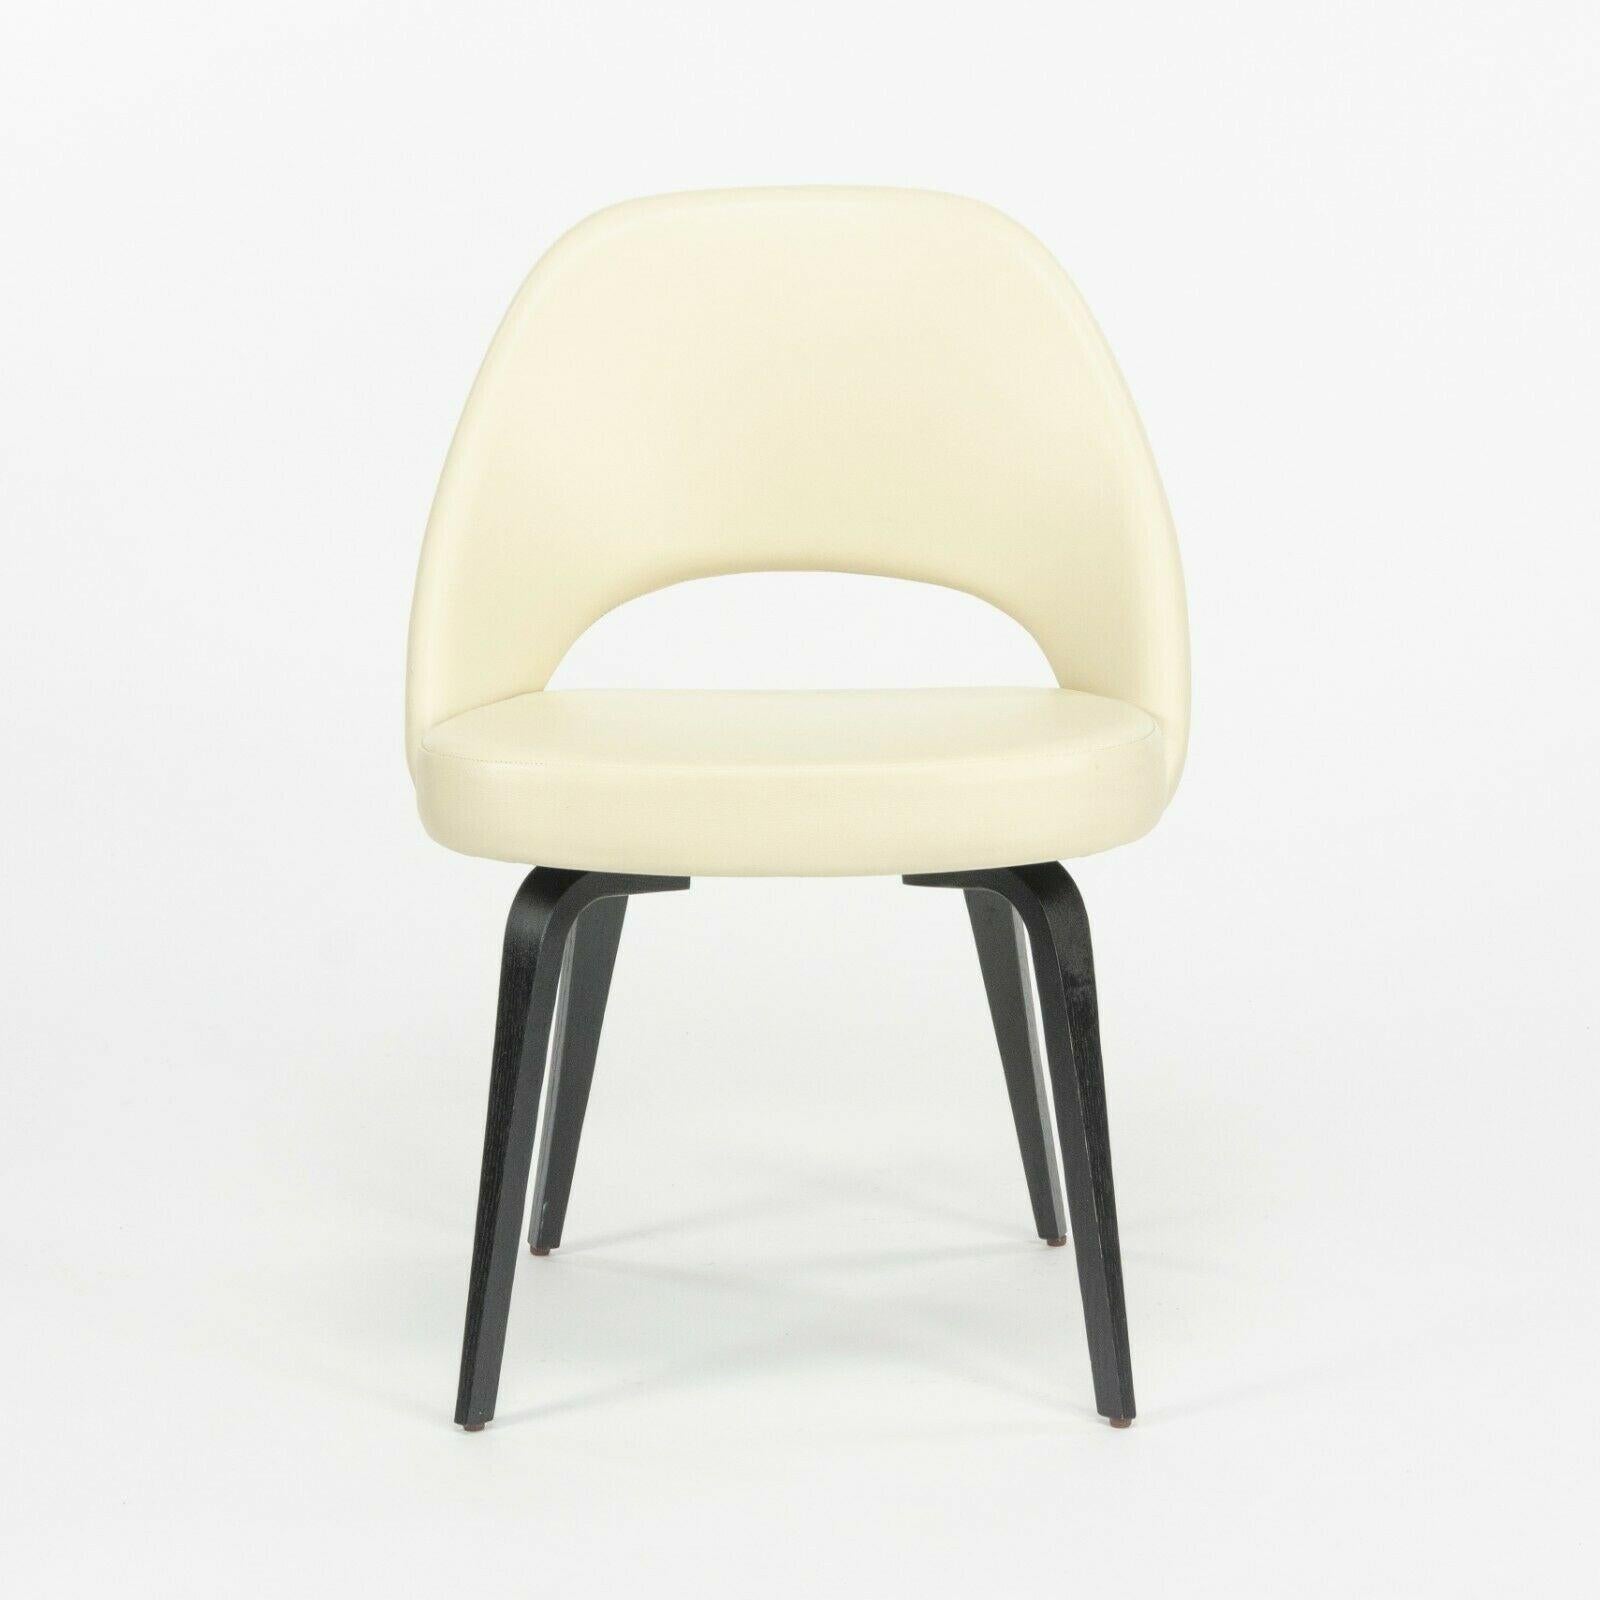 Listed for sale is a single (two are available for sale) 2020 production Eero Saarinen for Knoll Executive side chair with ivory leather and ebonized walnut wooden legs. This appears to be Knoll's Volo leather, which is ivory/off-white in color. It